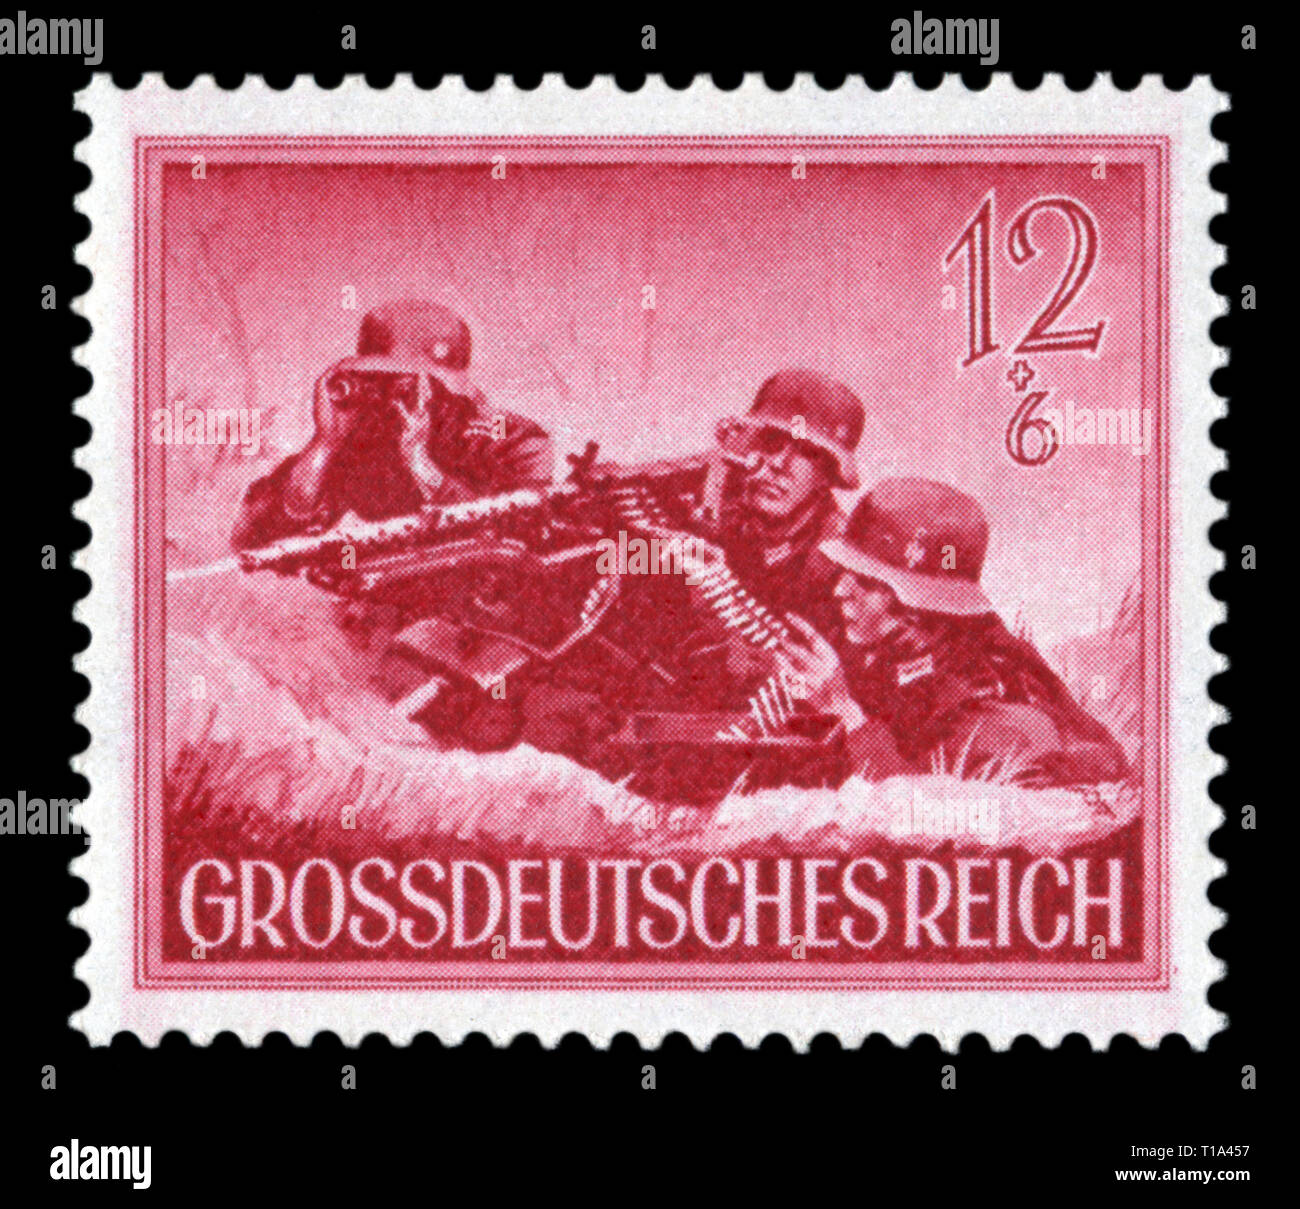 German historical stamp: Machine gunners division of the Wehrmacht. The Army Of The third Reich. Day of commemoration of the fallen soldiers, 1944 Stock Photo